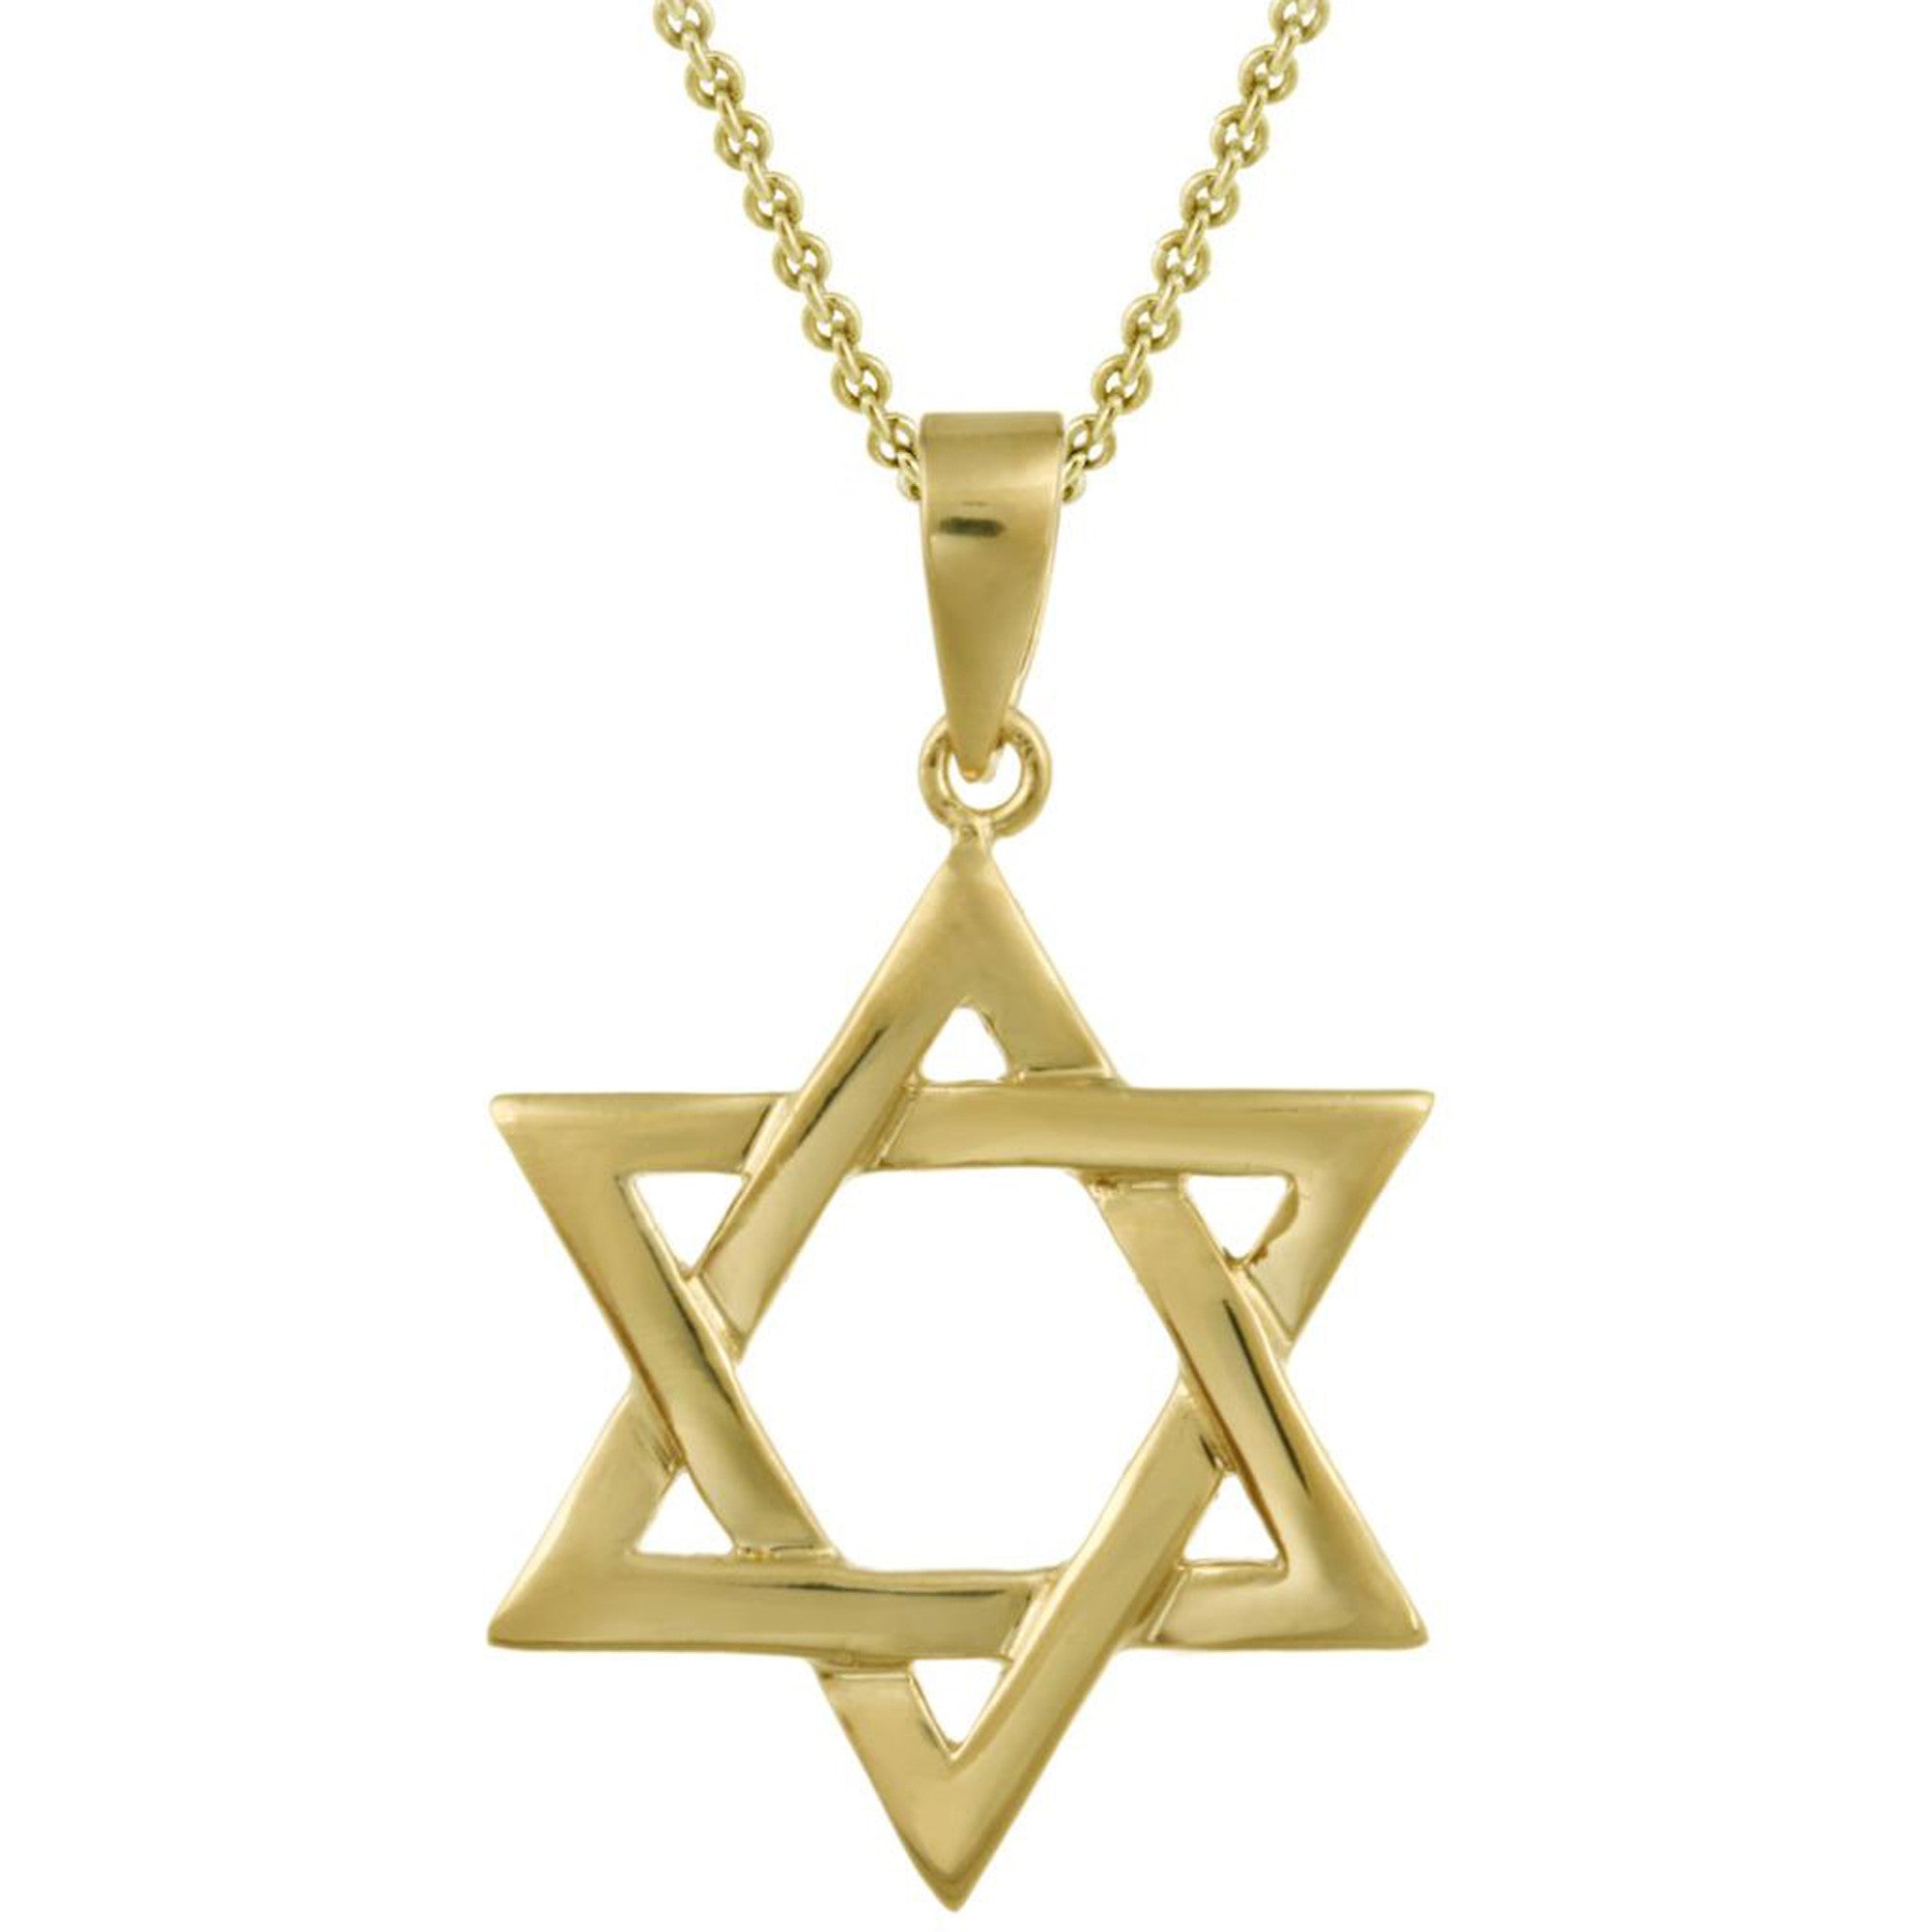 Star of David Necklace - 18k Gold Over Sterling Silver